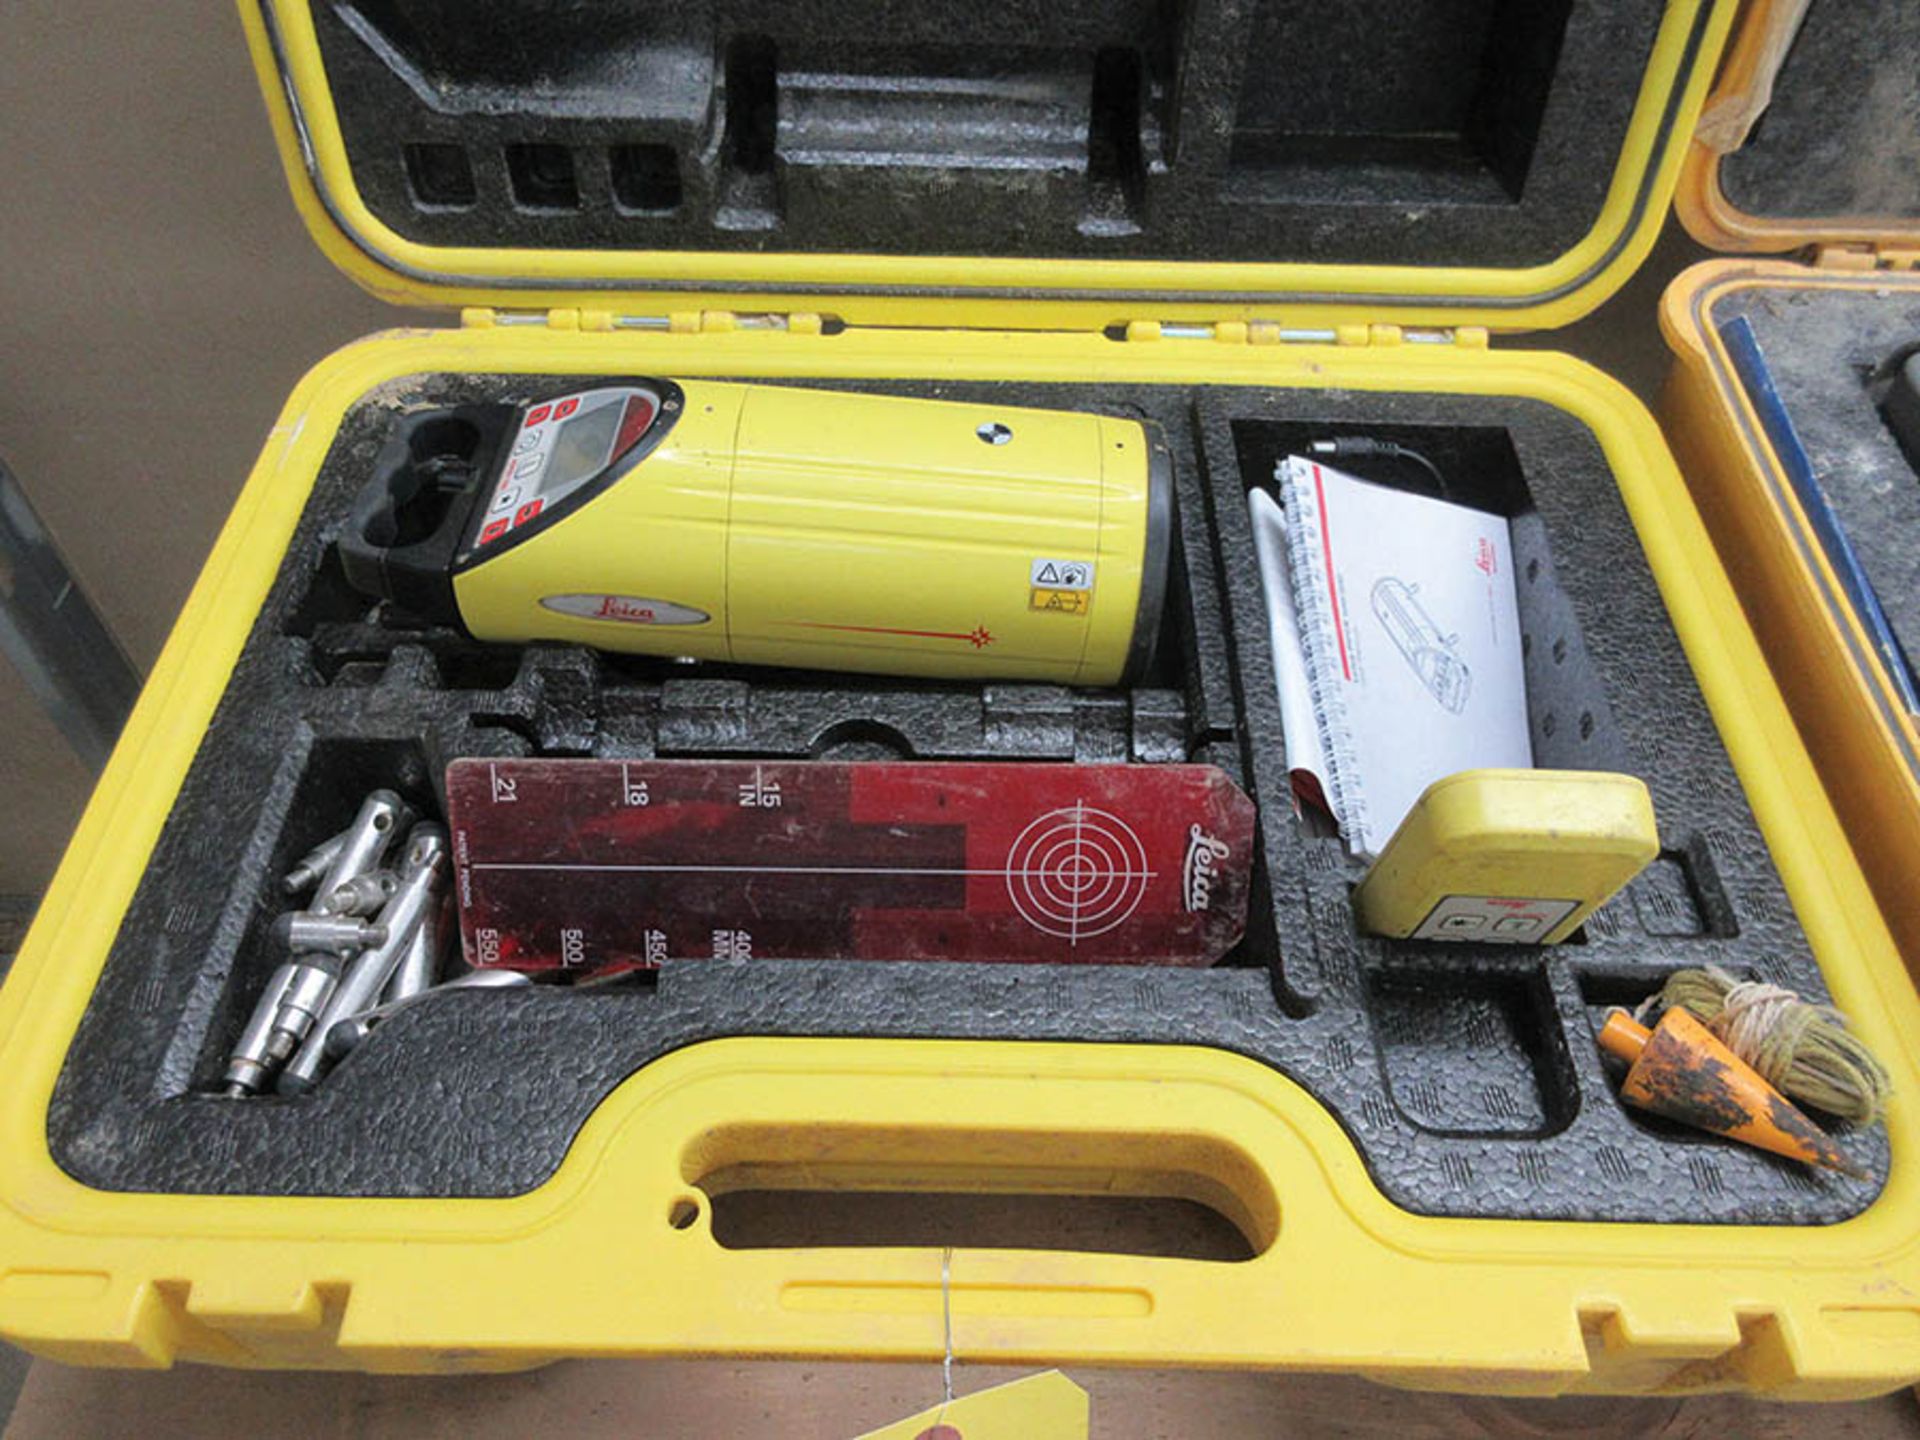 LEICA PIPER 200 PIPE LASER W/ ADJUSTABLE BASE